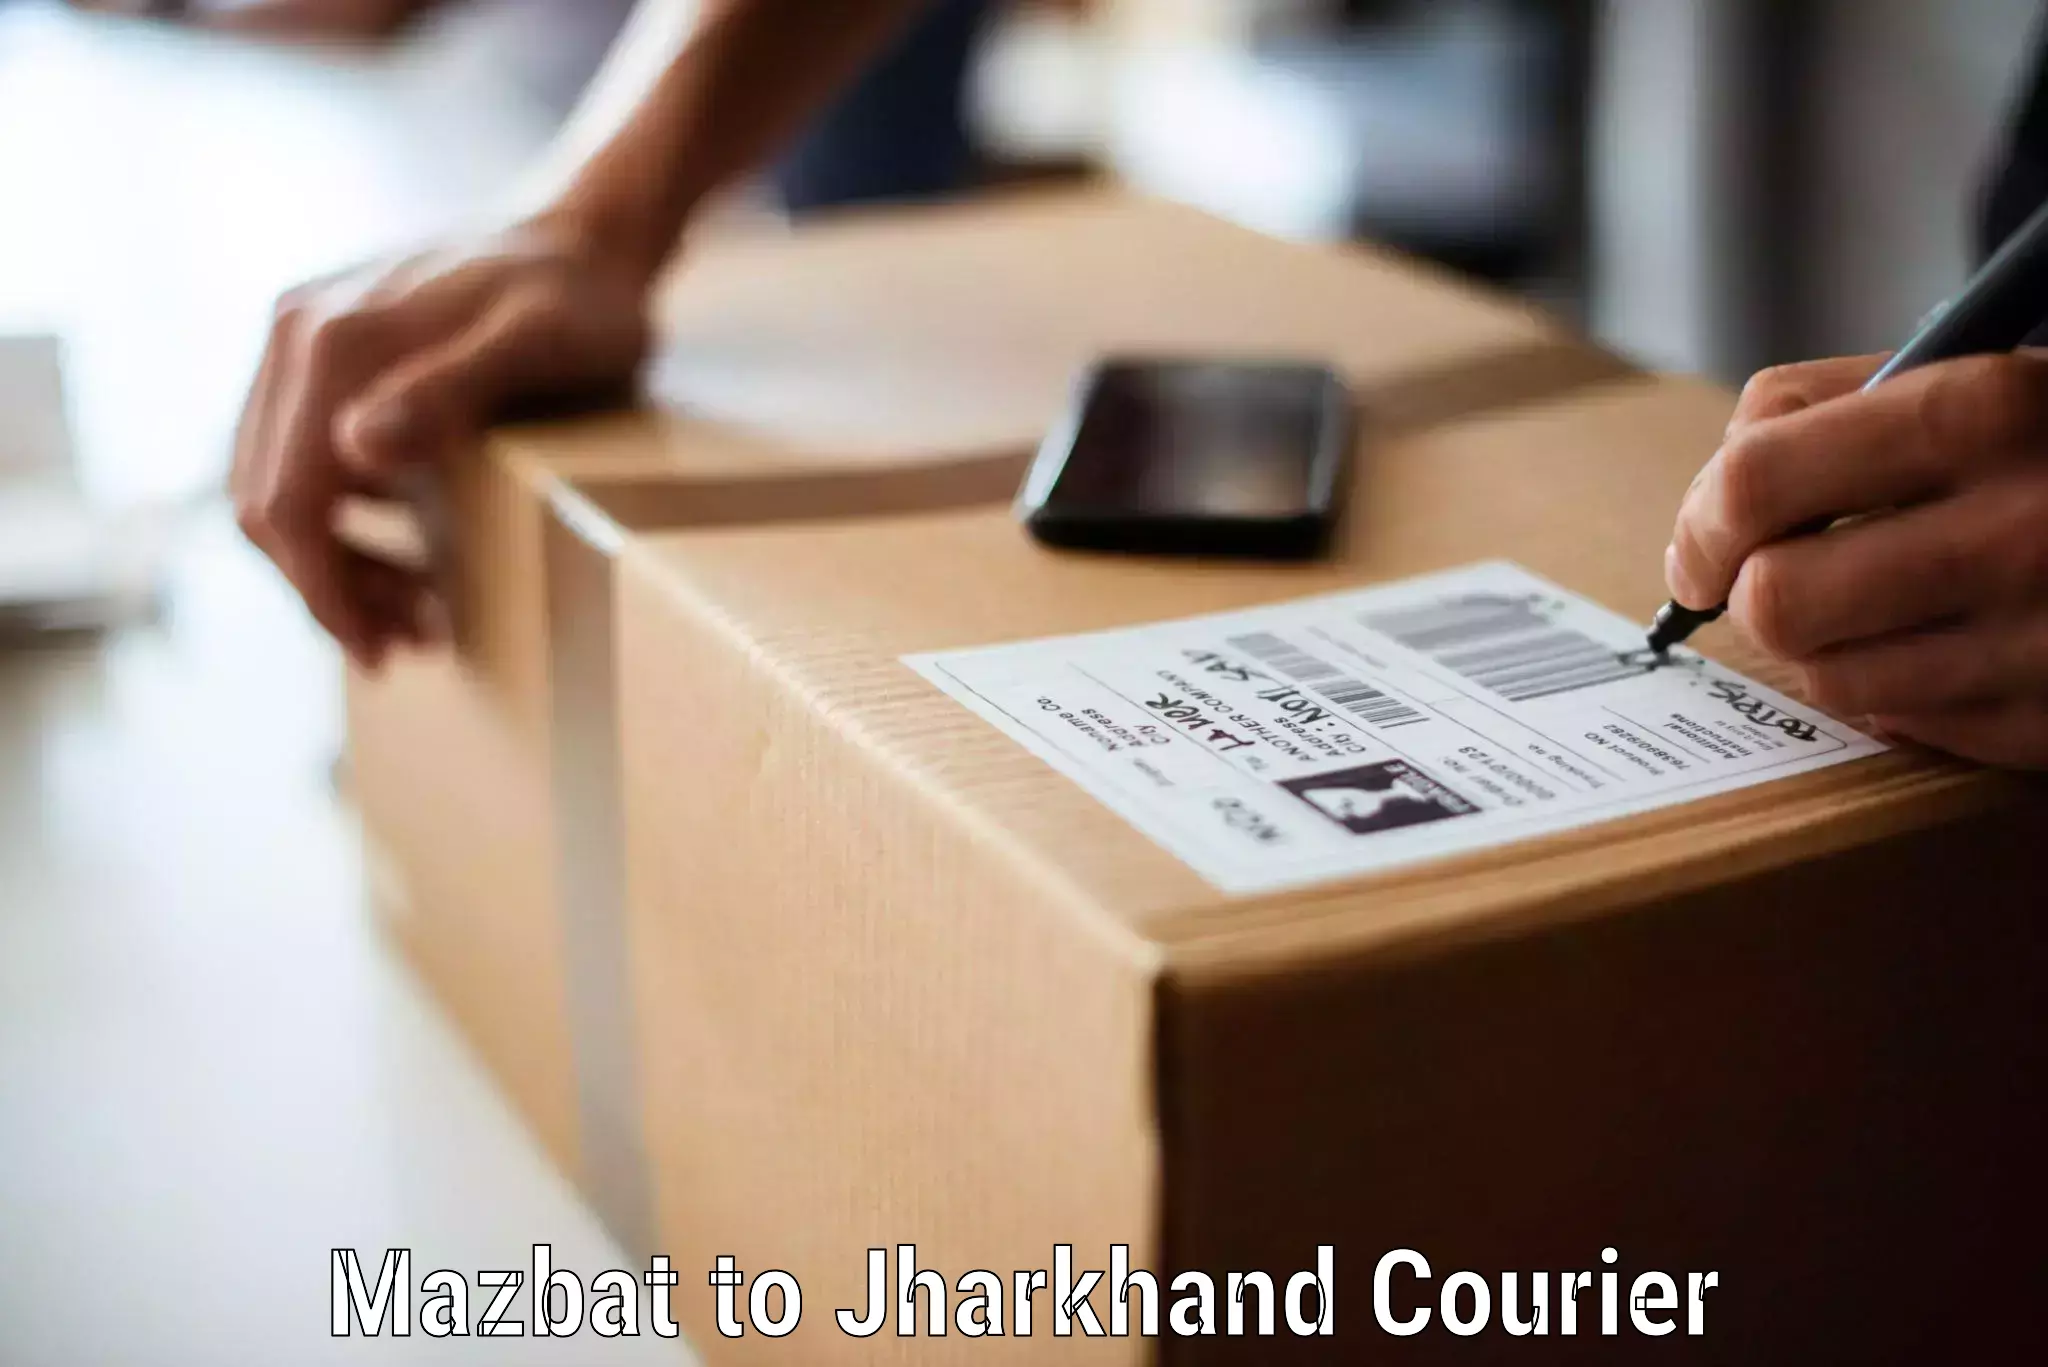 Trusted relocation experts Mazbat to Jharkhand